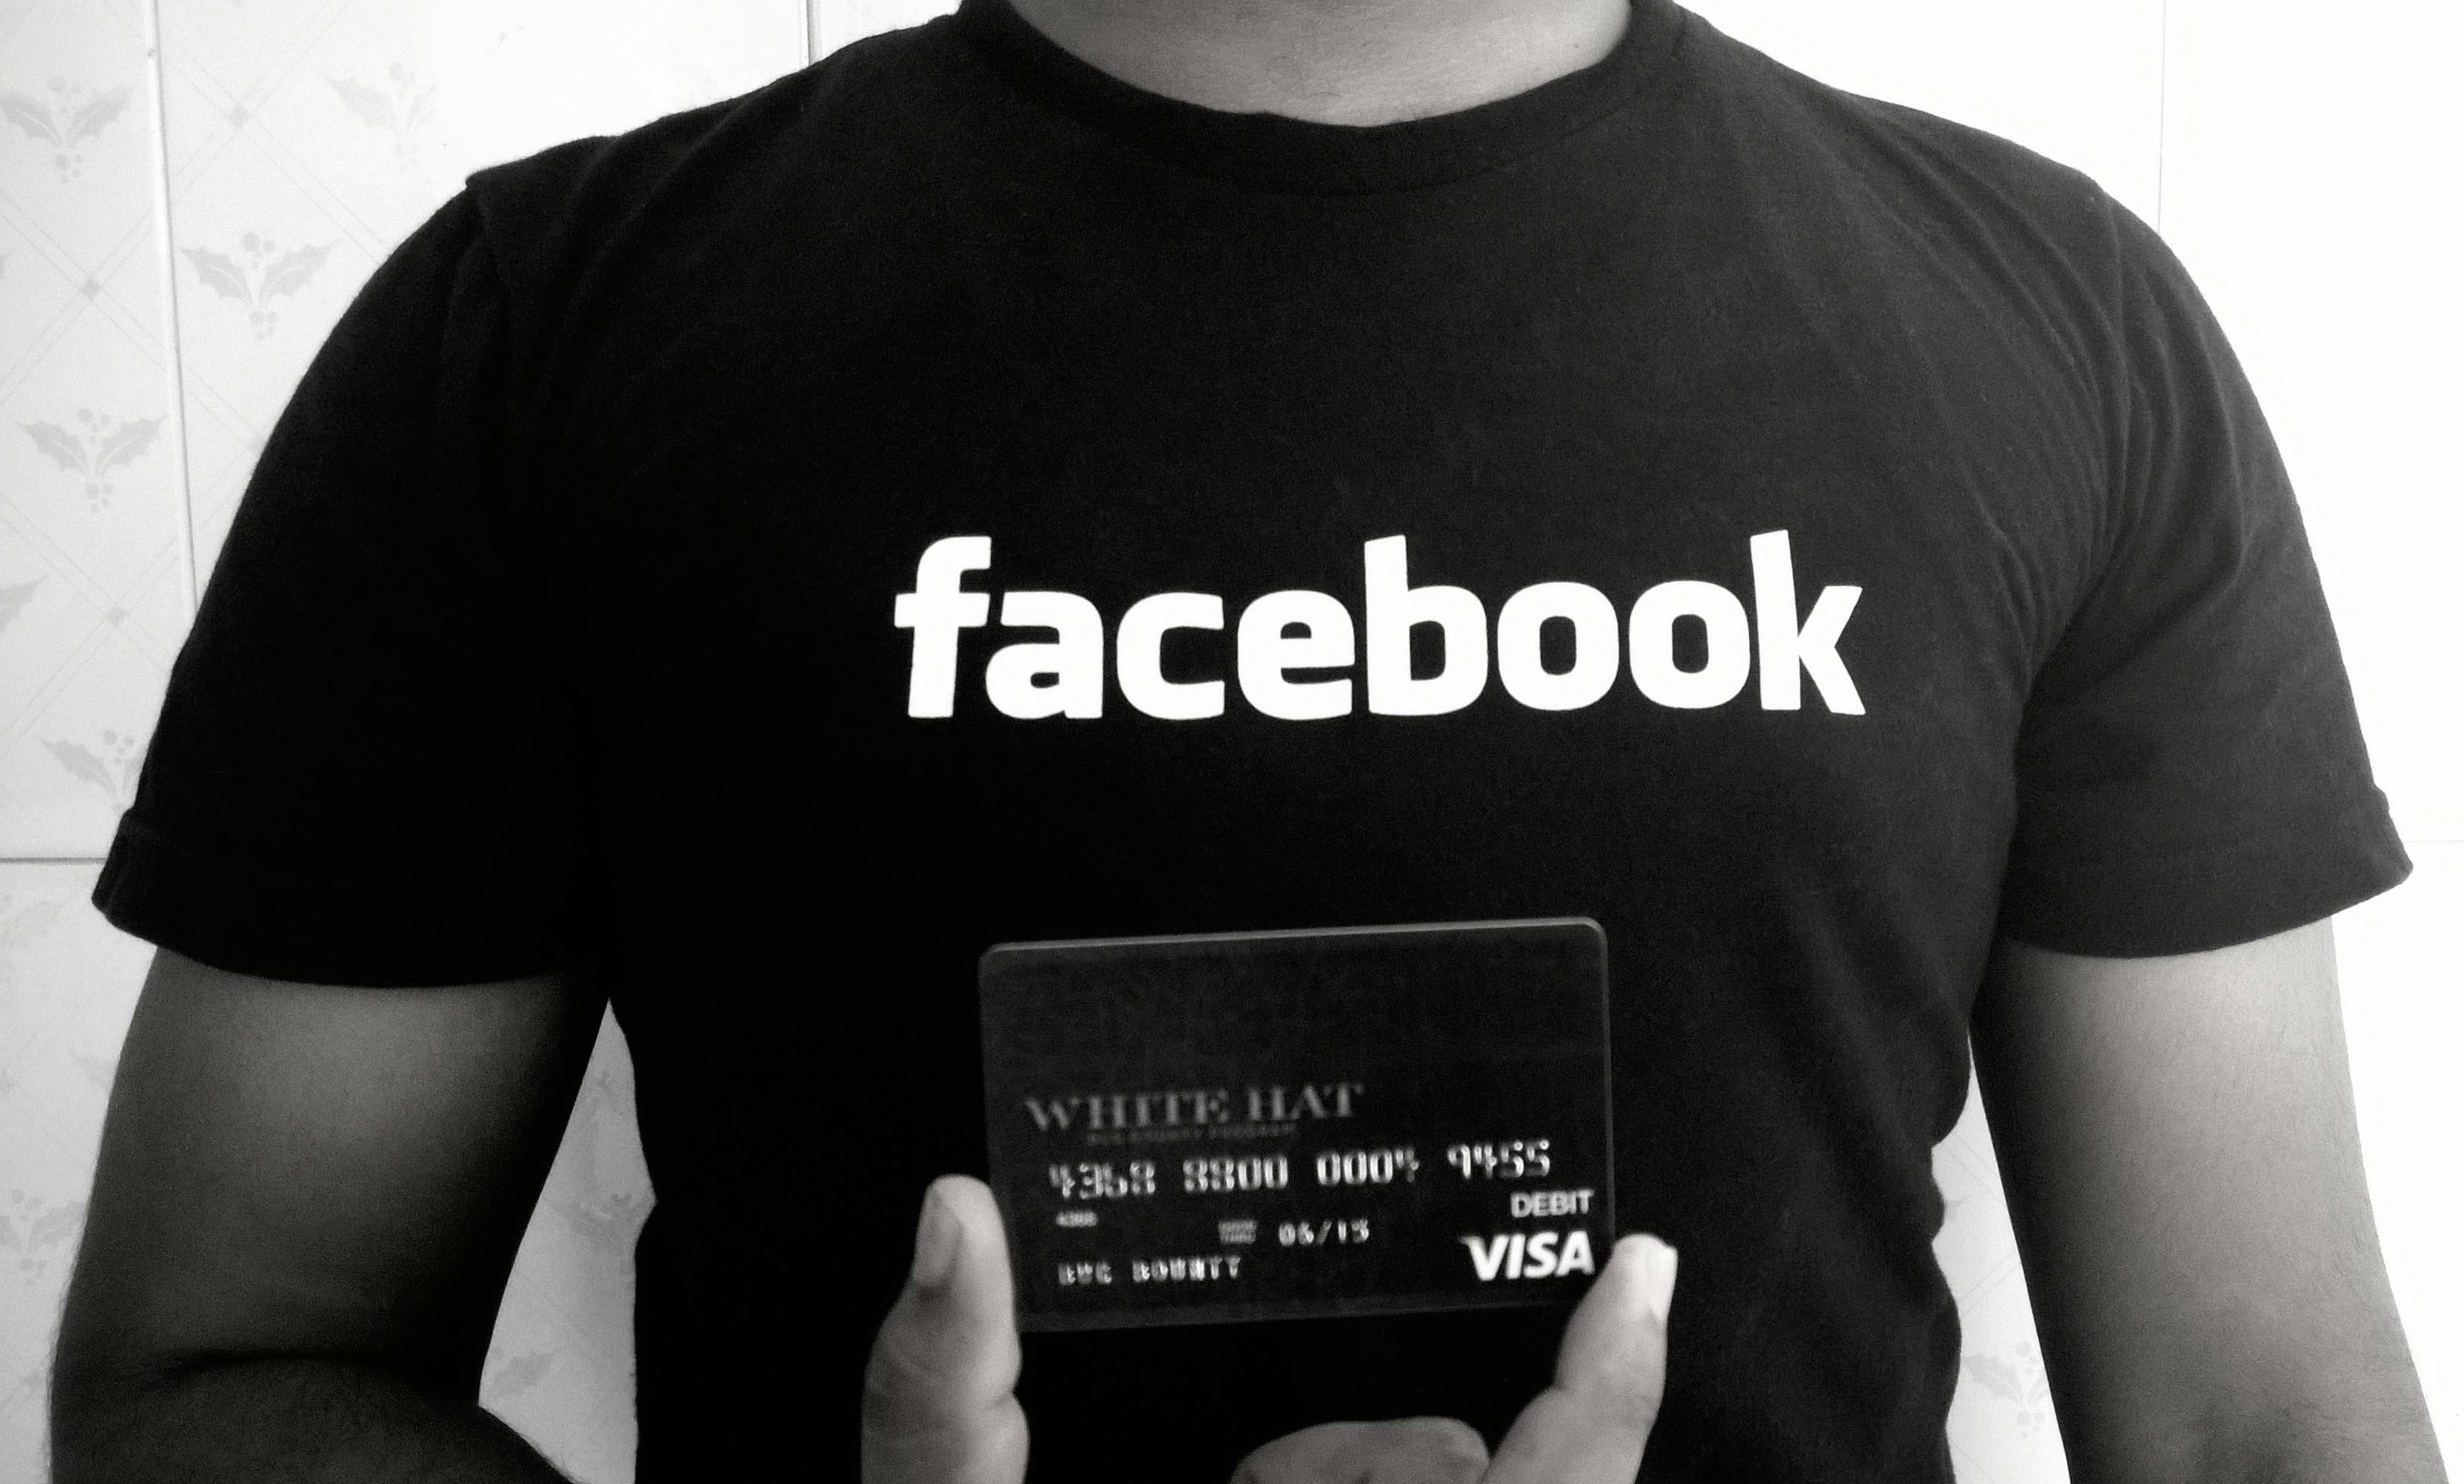 Facebook giving away T-shirts and debit cards to security researchers